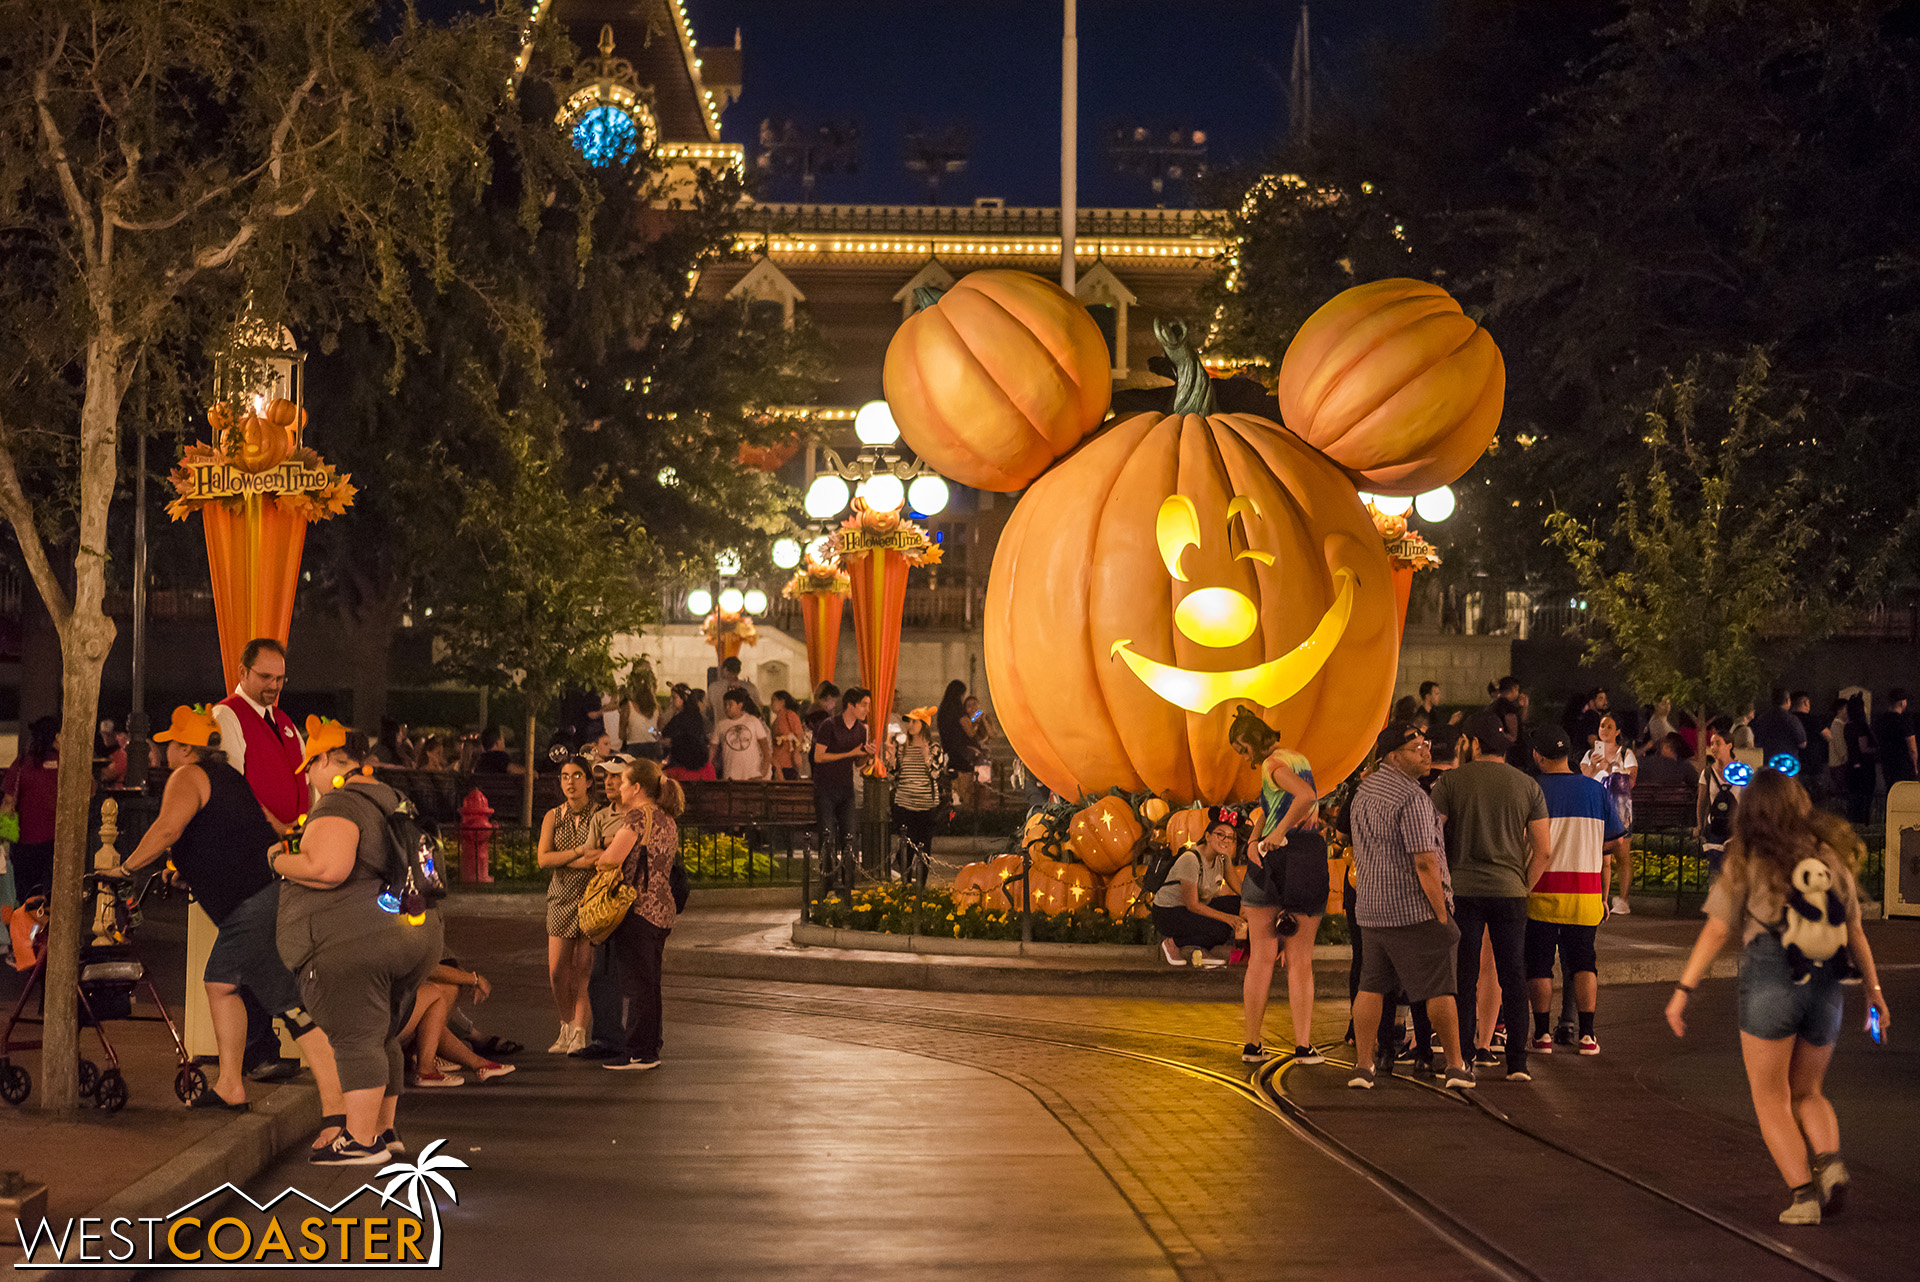  45 minutes after park closing, Main Street was still somewhat crowded. 